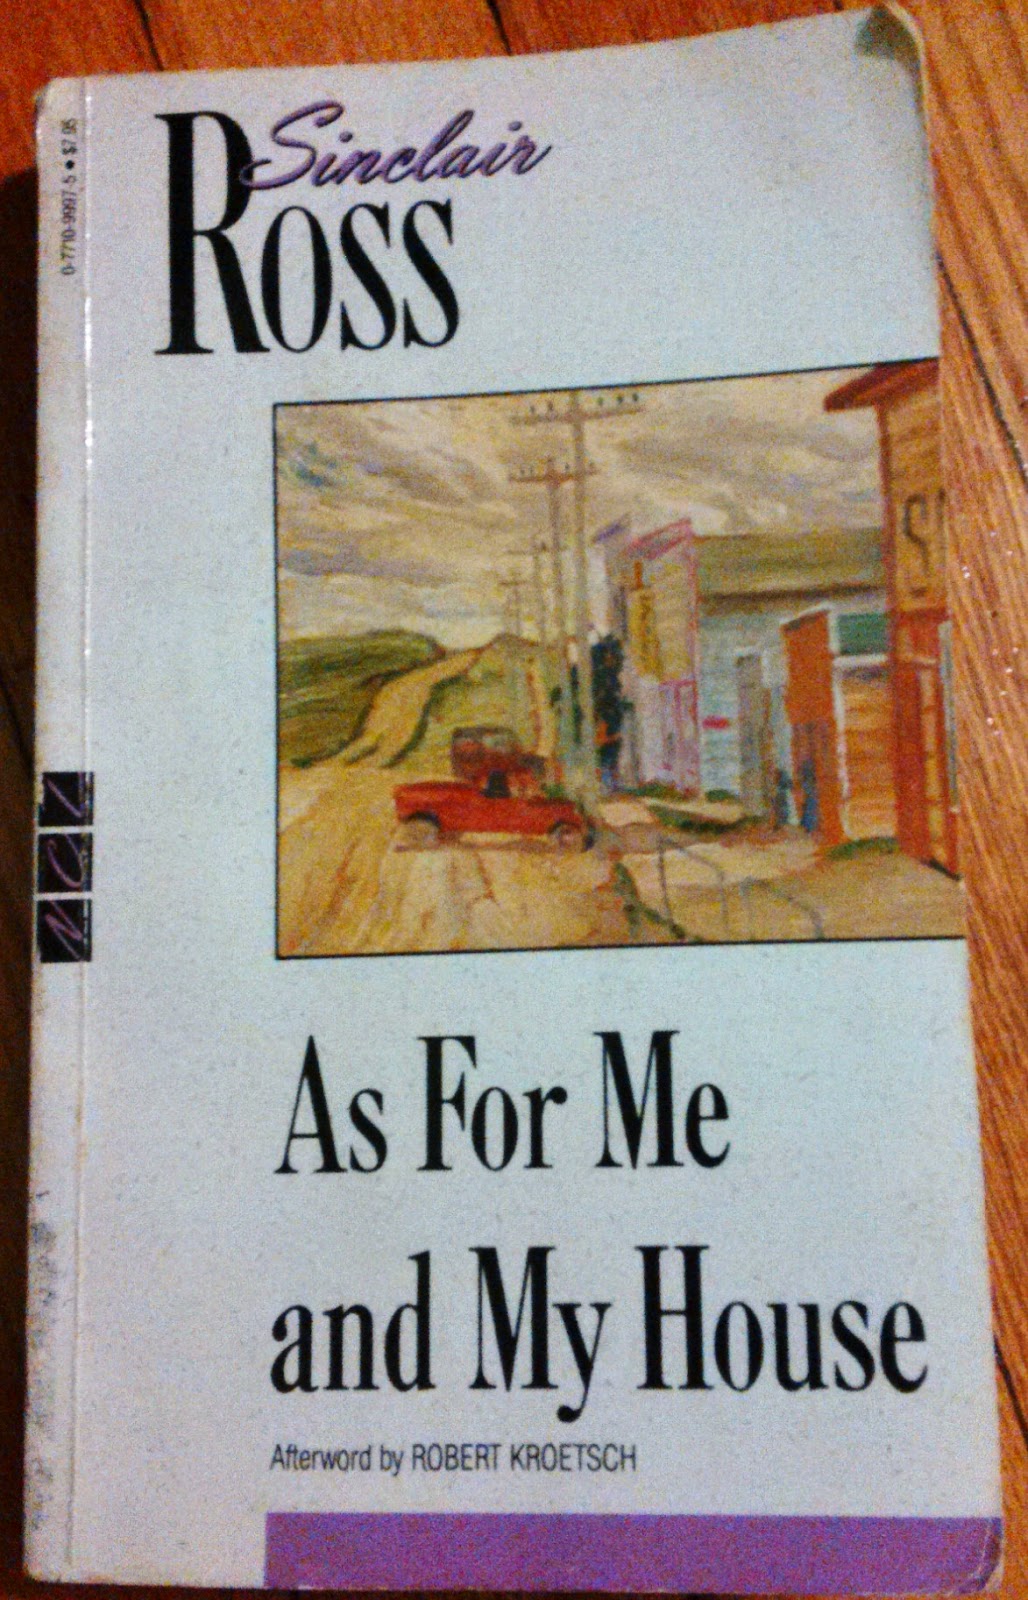 as for me and my house by sinclair ross